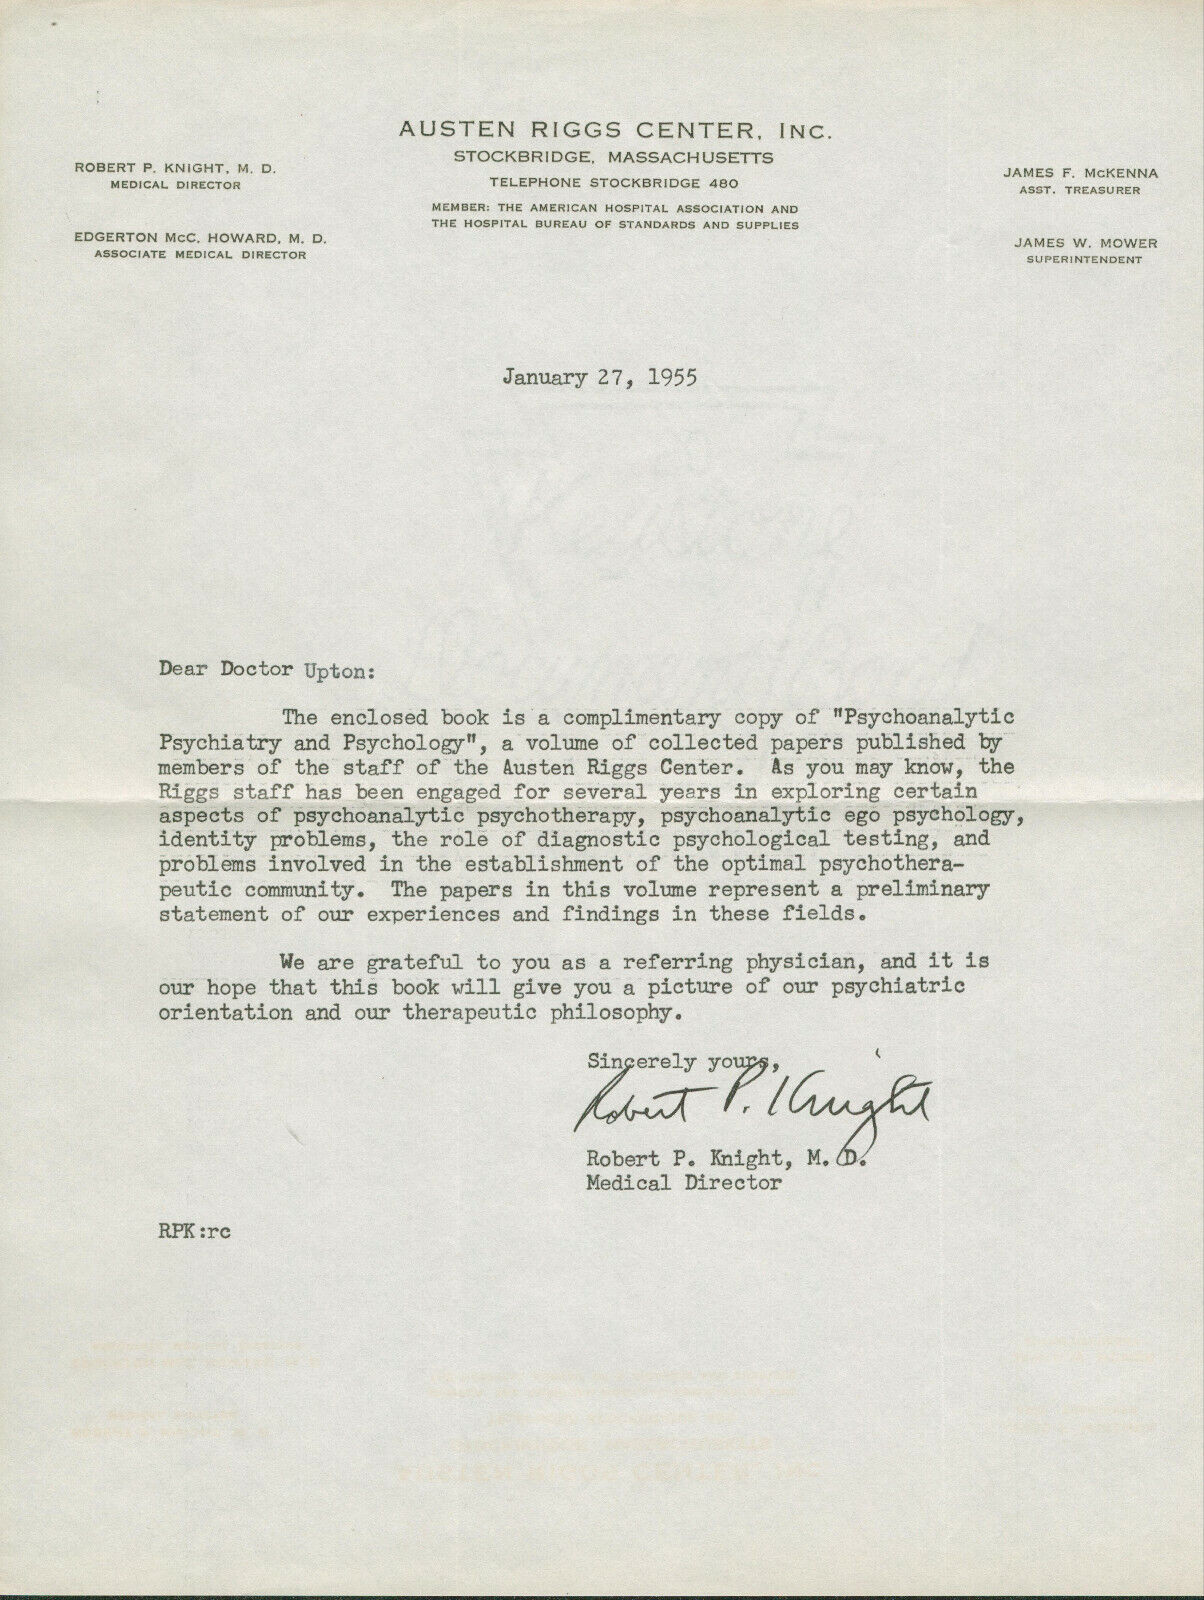 Robert P. Knight SIGNED AUTOGRAPHED Letter TLS Austen Riggs Center Psychiatry